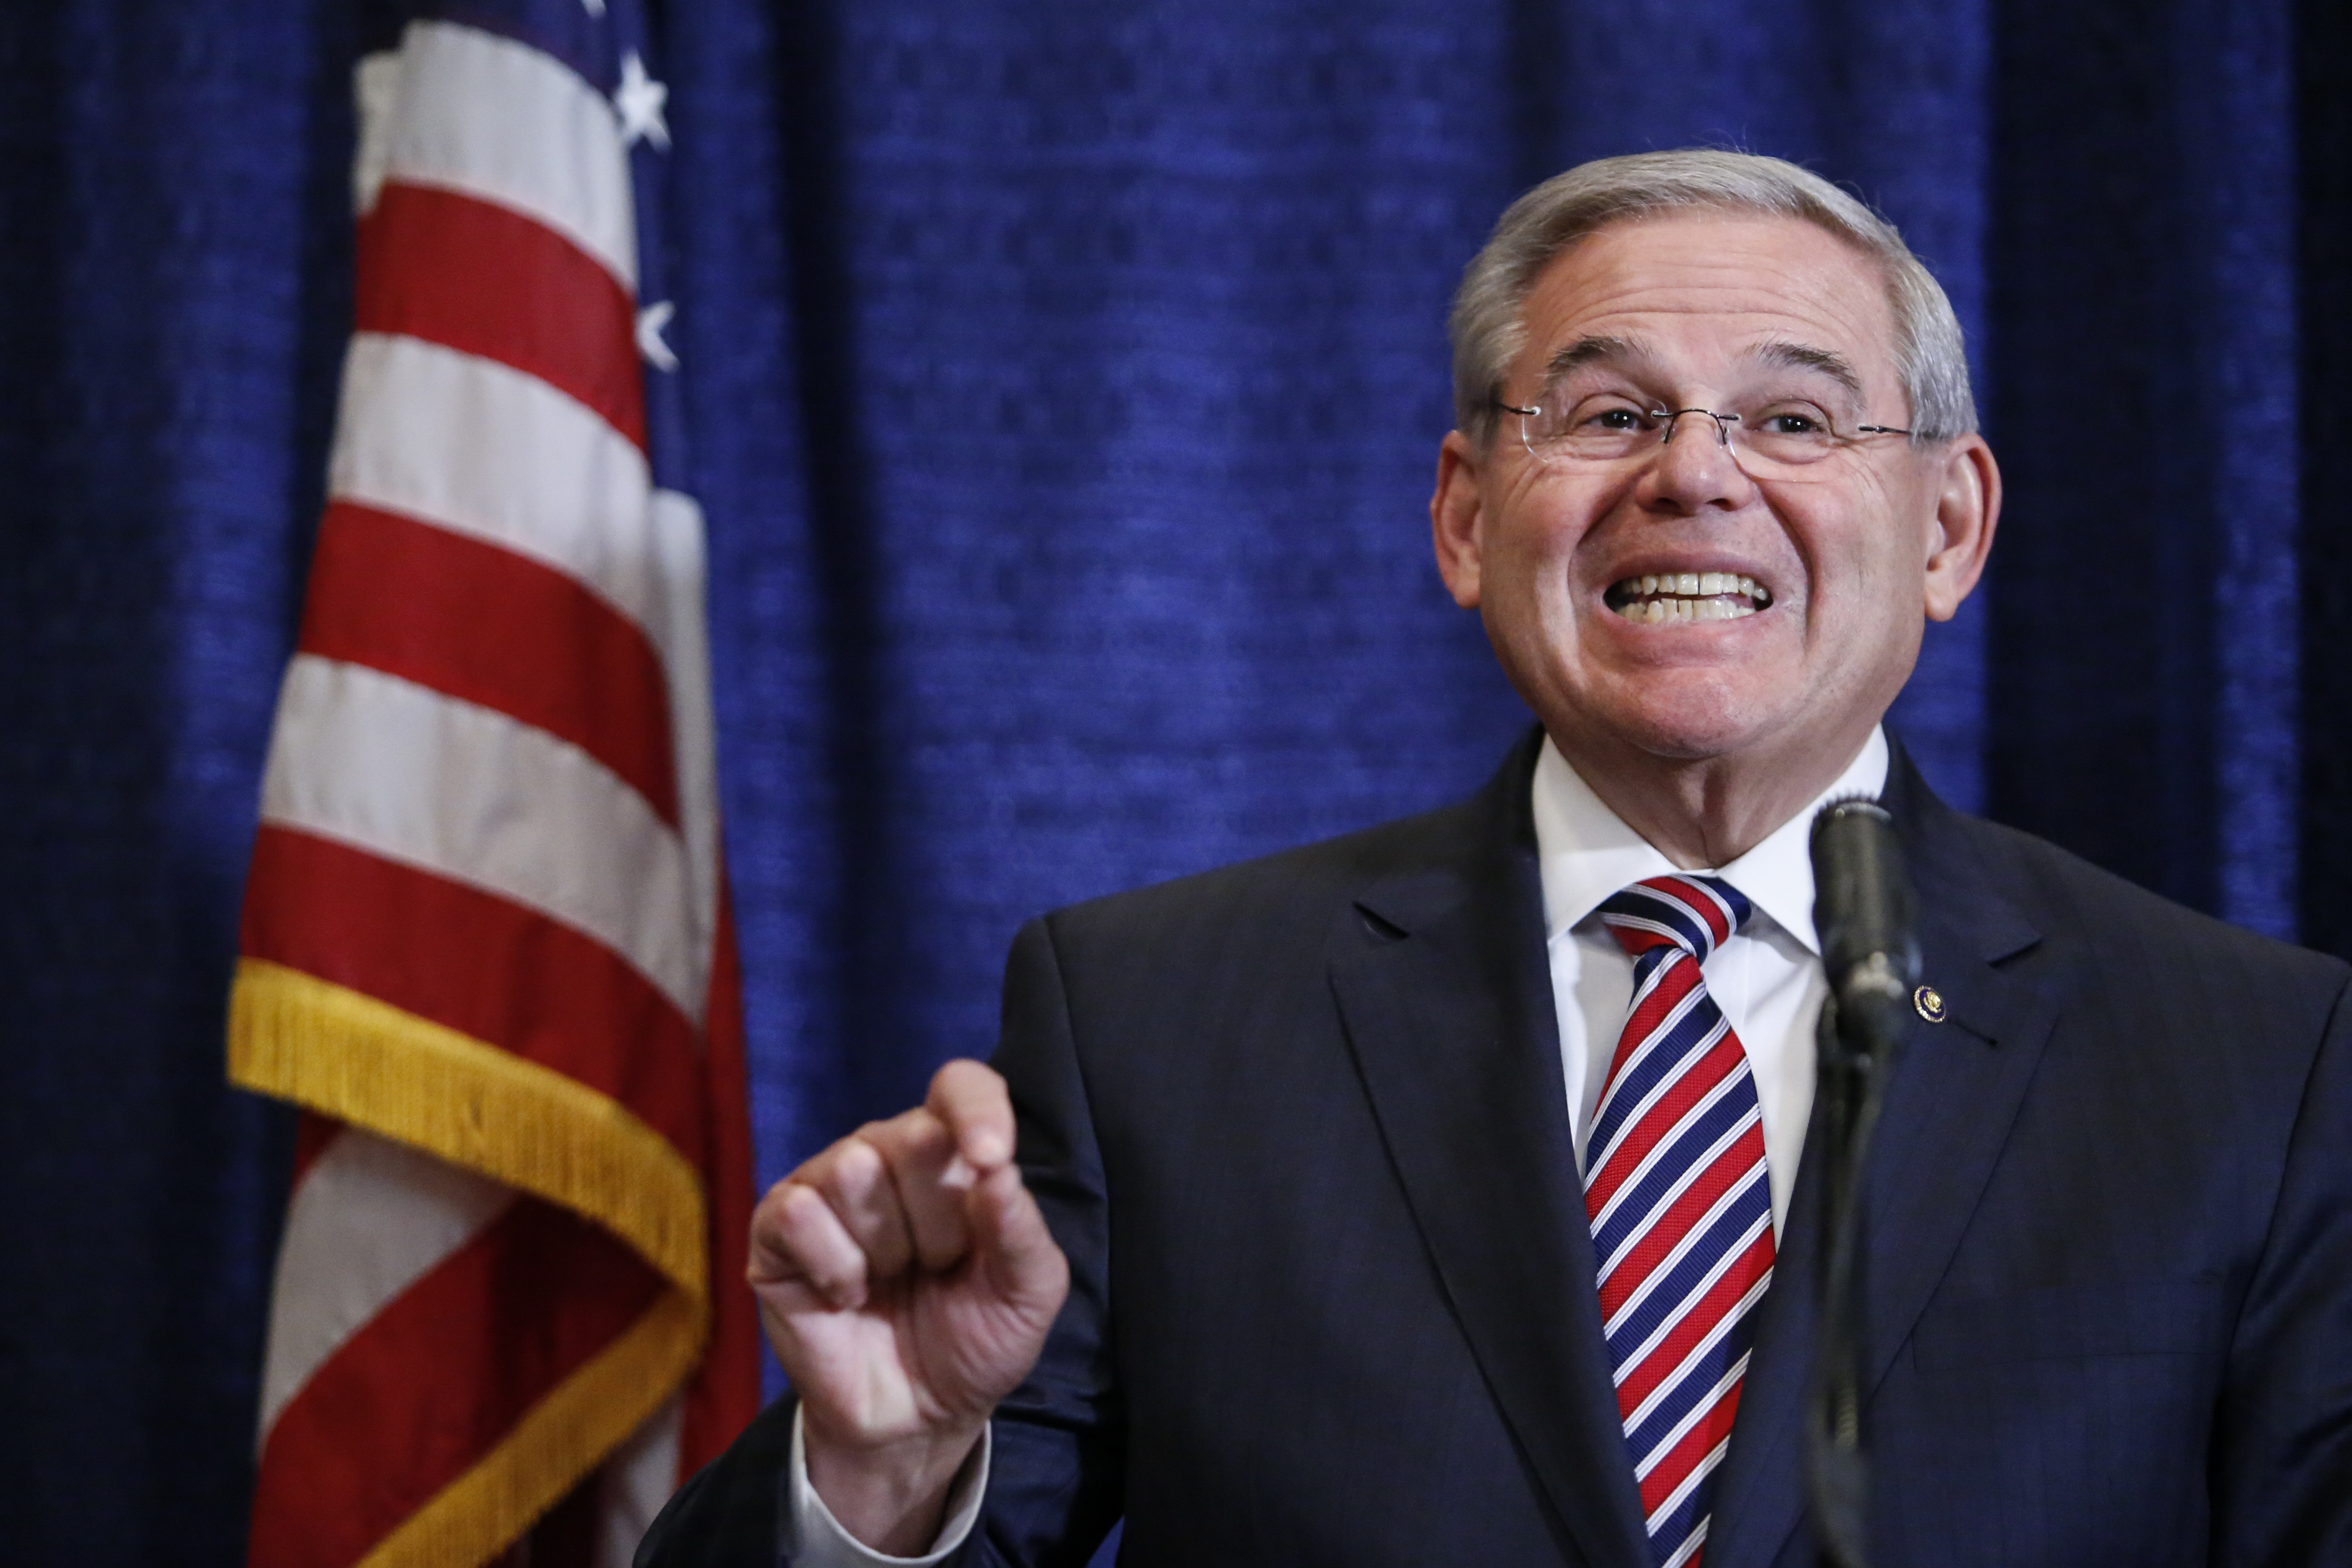 Sen. Robert Menendez (D-NJ) speaks at a press conference on April 1, 2015 in Newark, New Jersey. According to reports, Menendez has been indicted on federal corruption charges of conspiracy to commit bribery and wire fraud. (Photo by Kena Betancur/Getty Images)